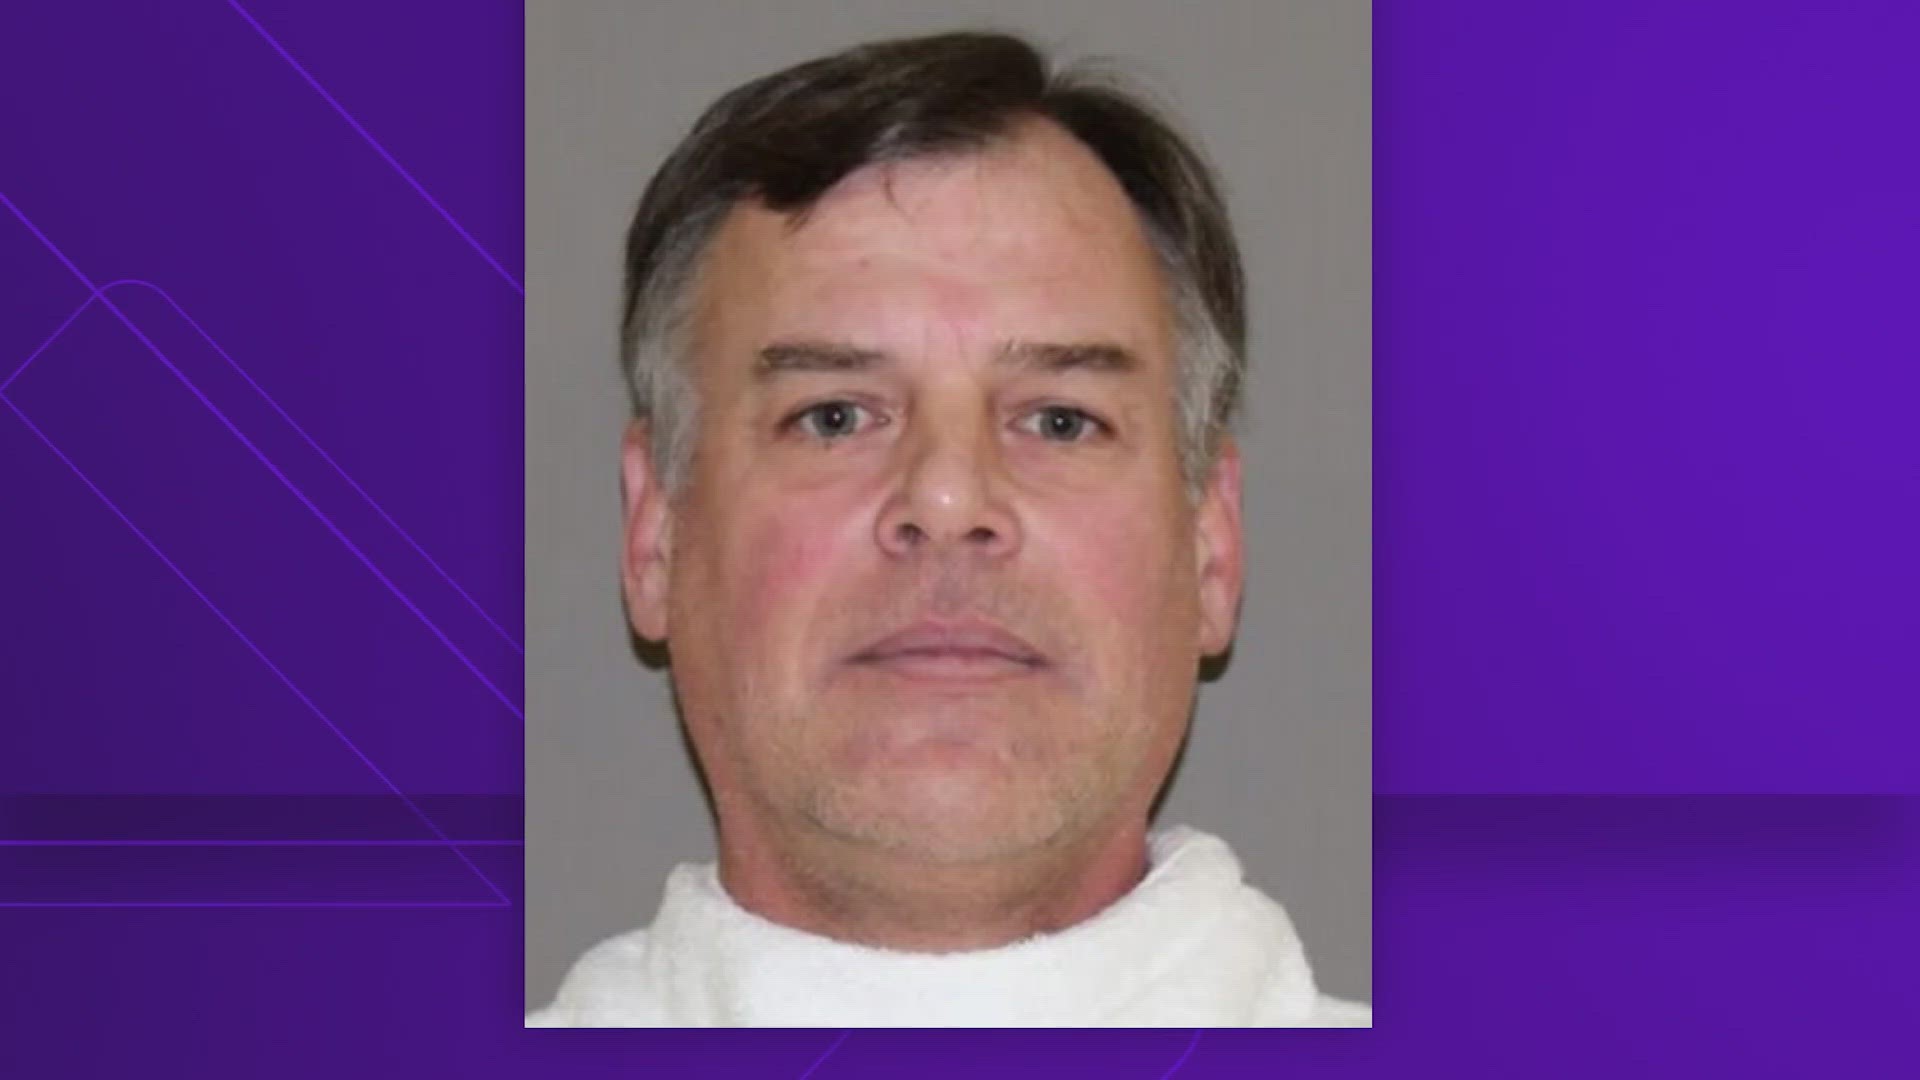 Former All-Star Texas Rangers reliever John Wetteland was initially arrested in January 2019 on charges of continuous sexual abuse of a child under the age of 14.